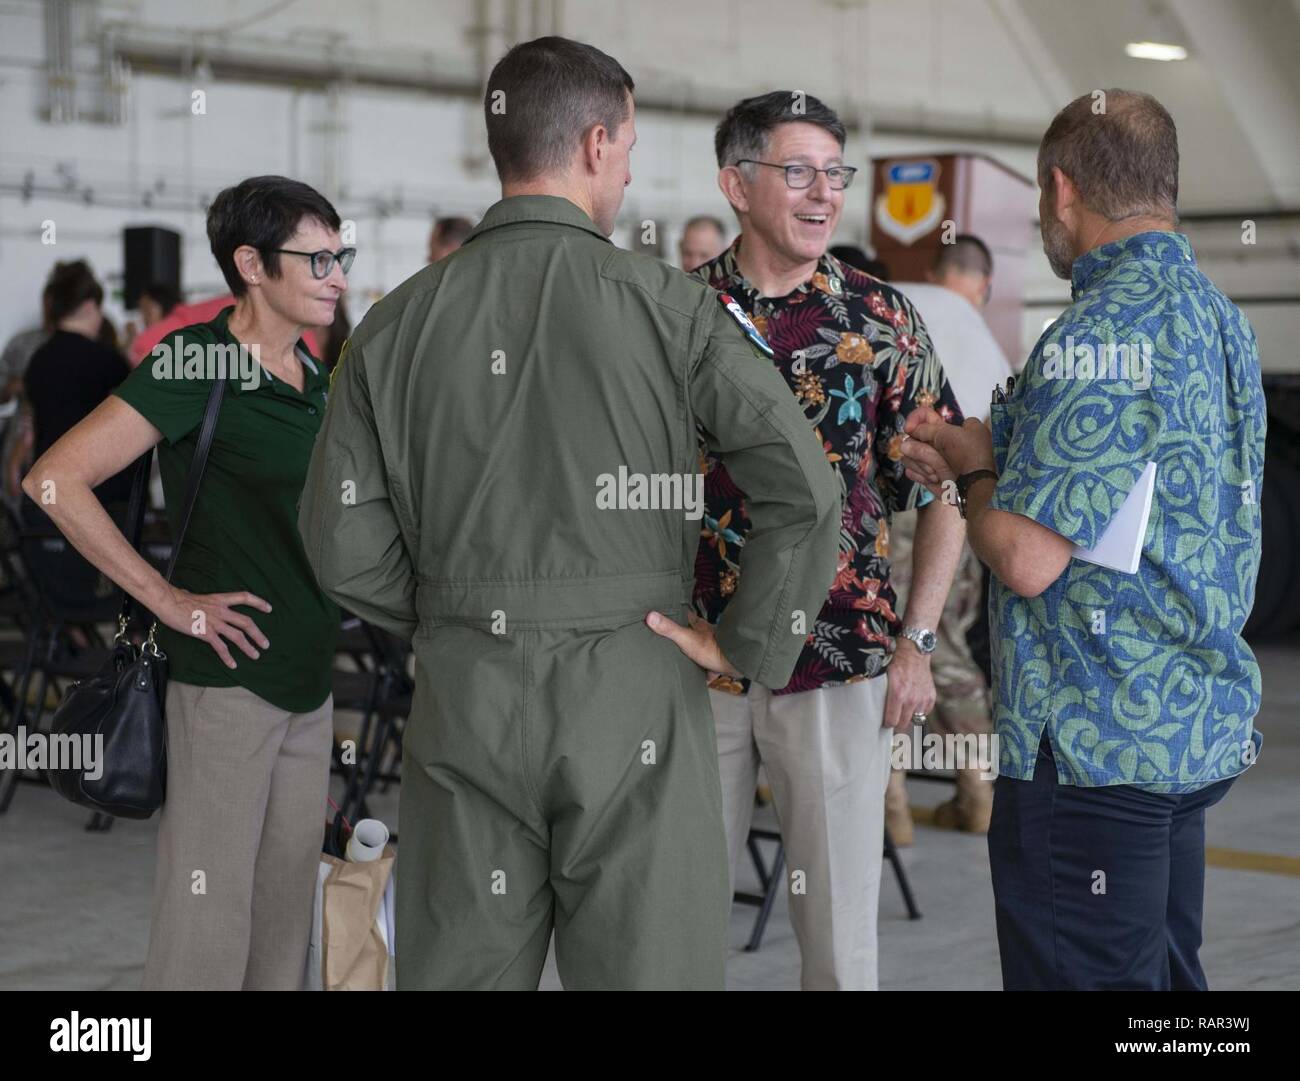 ANDERSEN AIR FORCE BASE, Guam (Dec. 10, 2018) - Thomas Krise, president, University of Guam, third from left, and his wife, far left, engage in conversation during the Operation Christmas Drop Push Ceremony at Andersen Air Force Base Dec. 10.  During the ceremony, the first of nearly 100 boxes of humanitarian goods was pushed into the C-130 before being delivered to 56 islands across the Commonwealth of the Northern Mariana Islands, the FSM and the Republic of Palau. Stock Photo